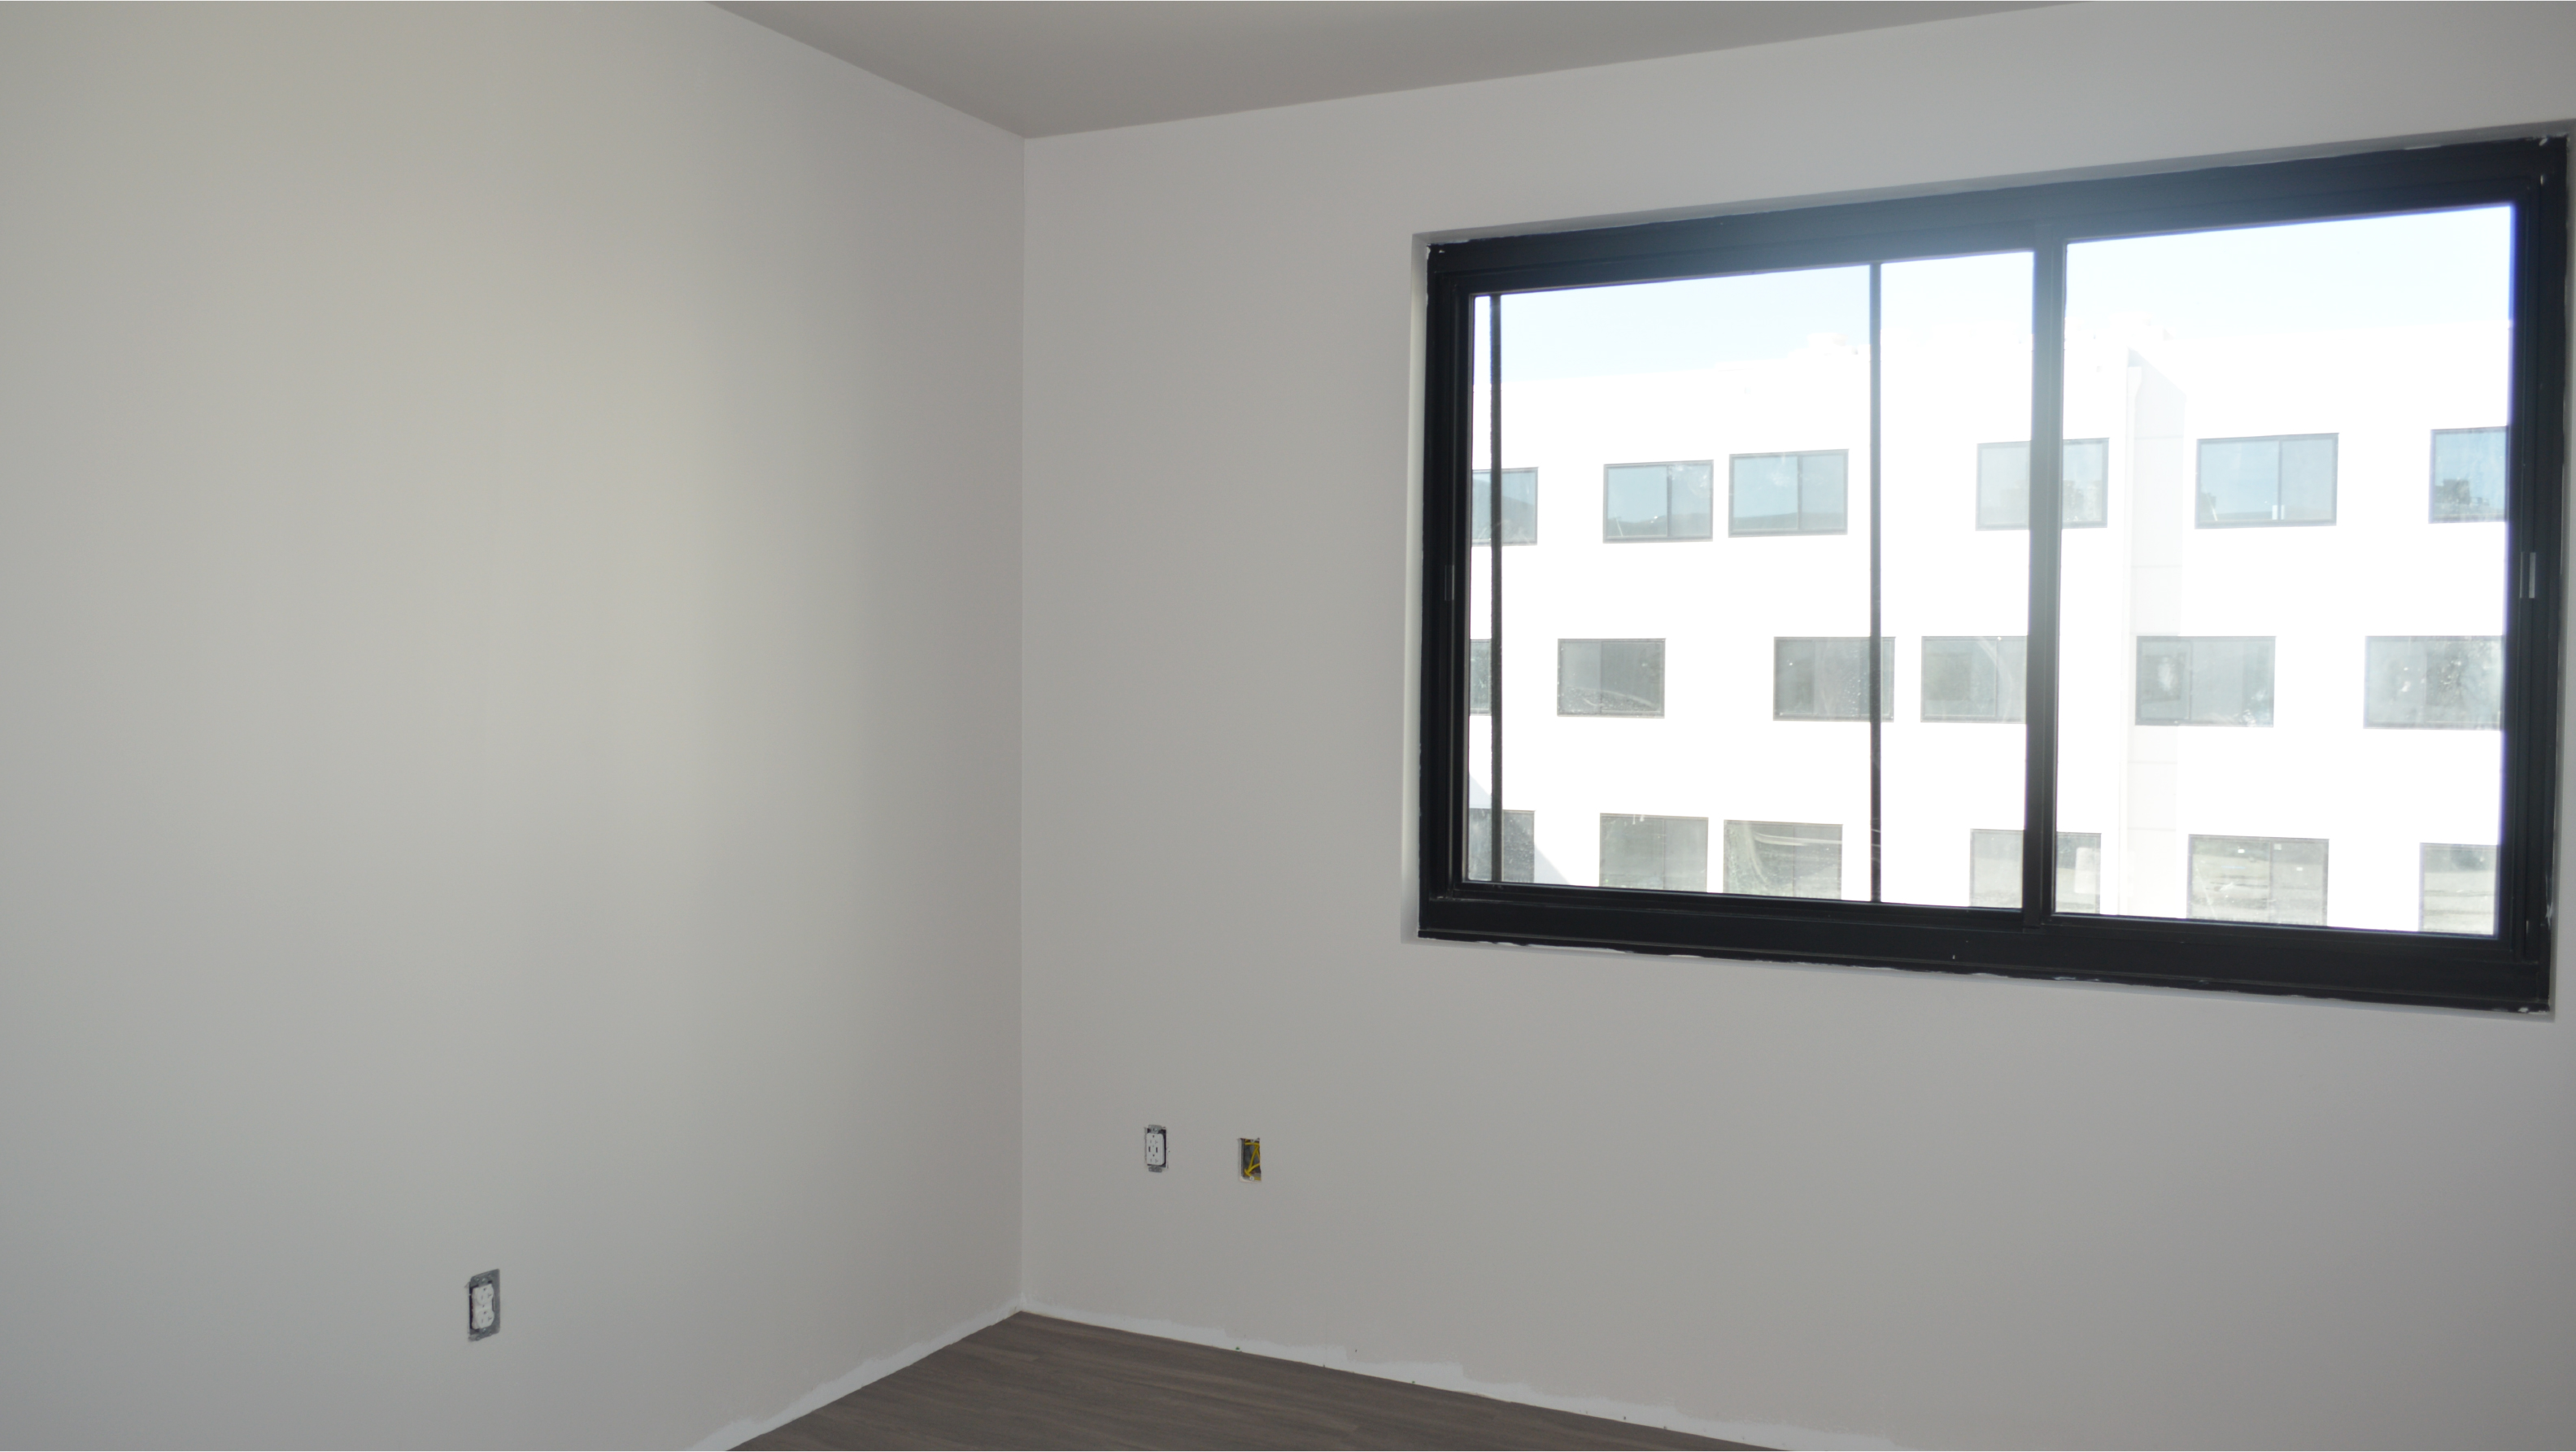 The New Residence Hall Interior Room